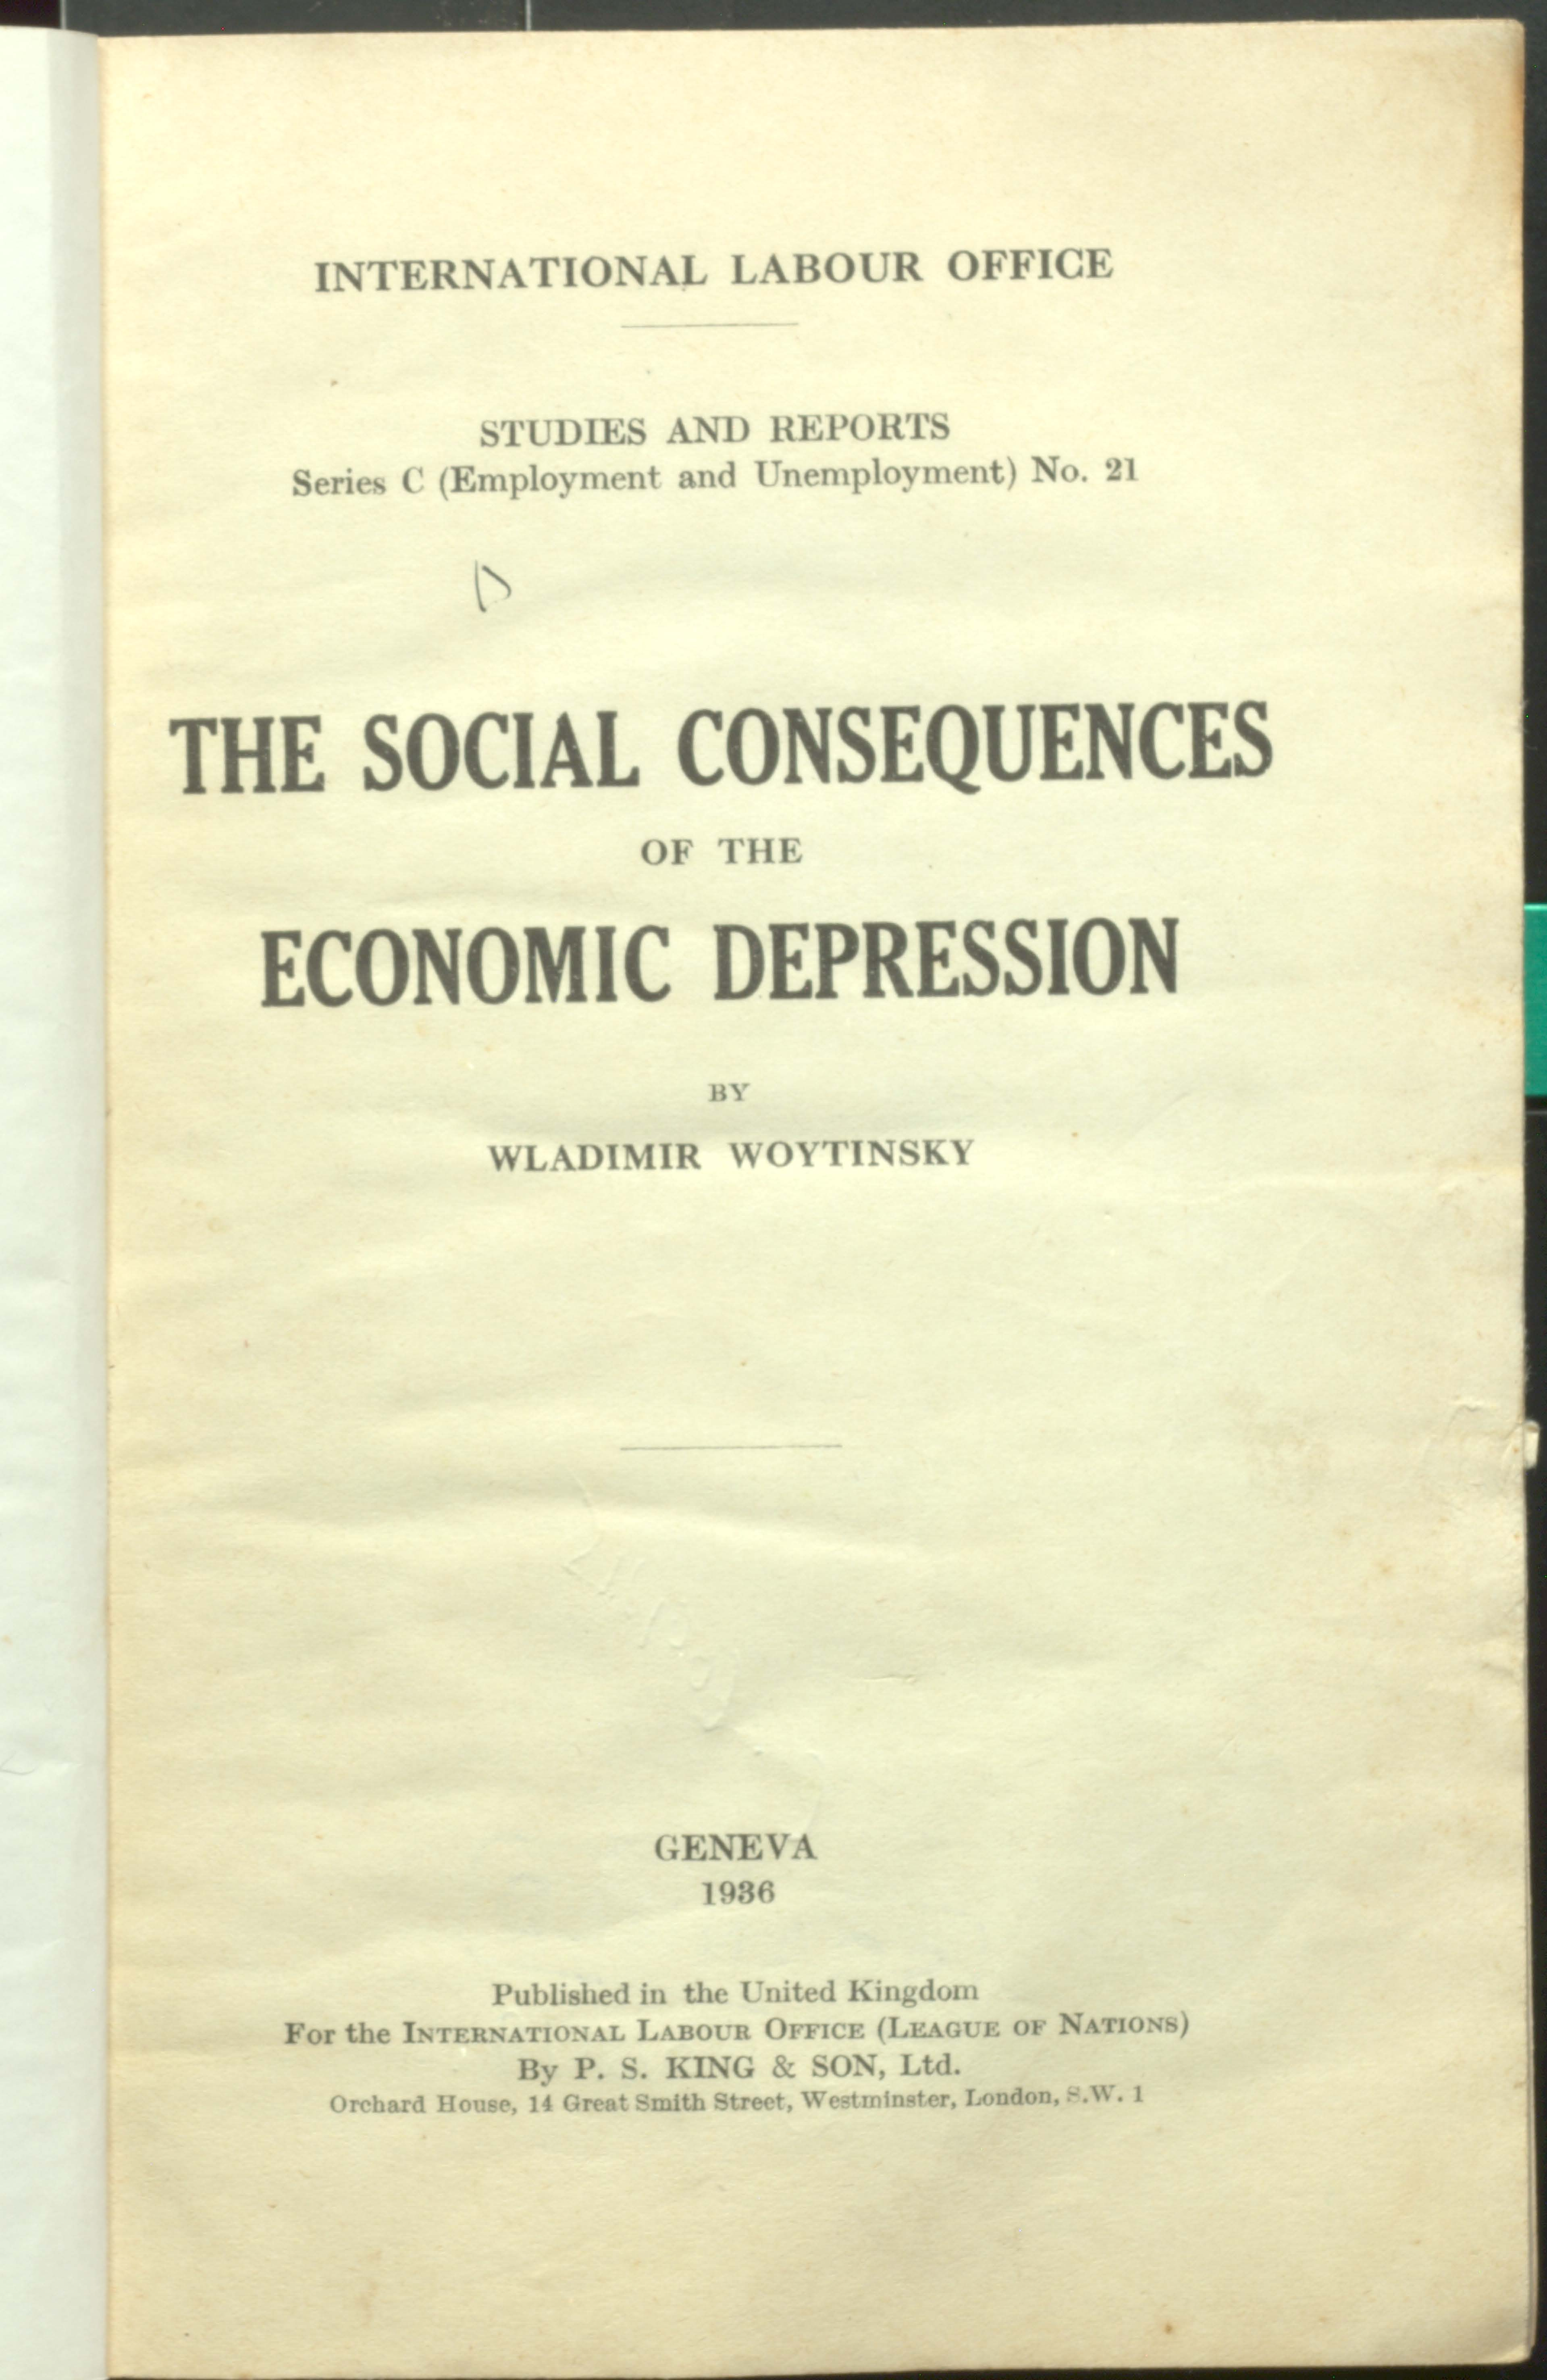 The social consequences of the economic depression